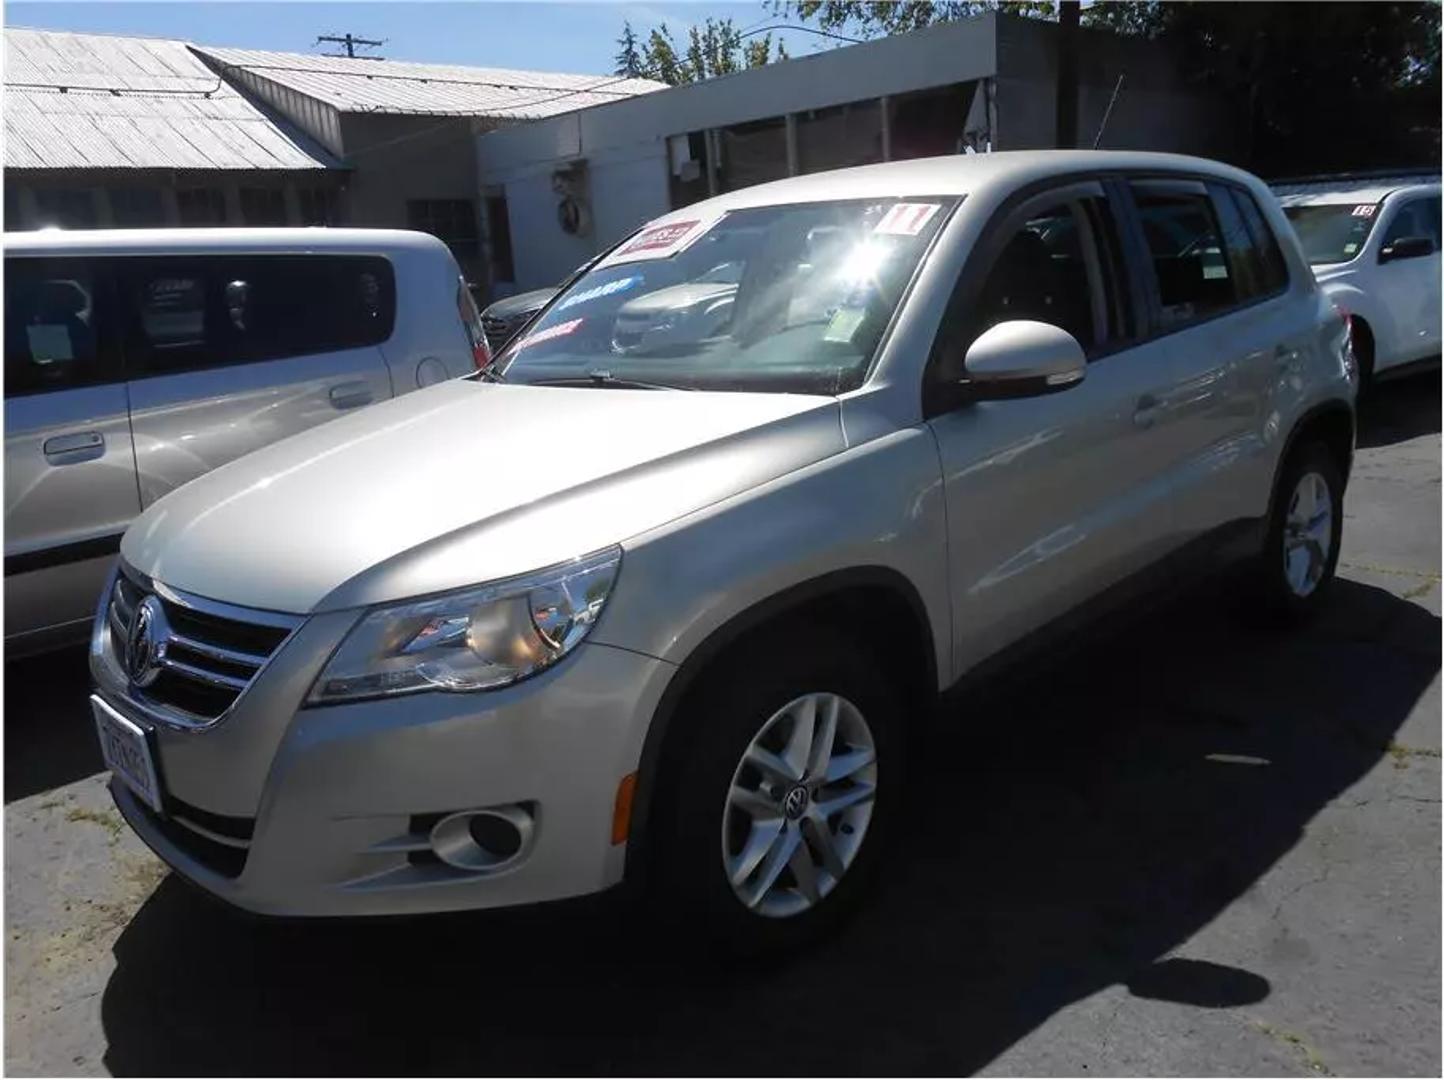 Used 2011 Volkswagen Tiguan S with VIN WVGAV7AX3BW520988 for sale in Roseville, CA